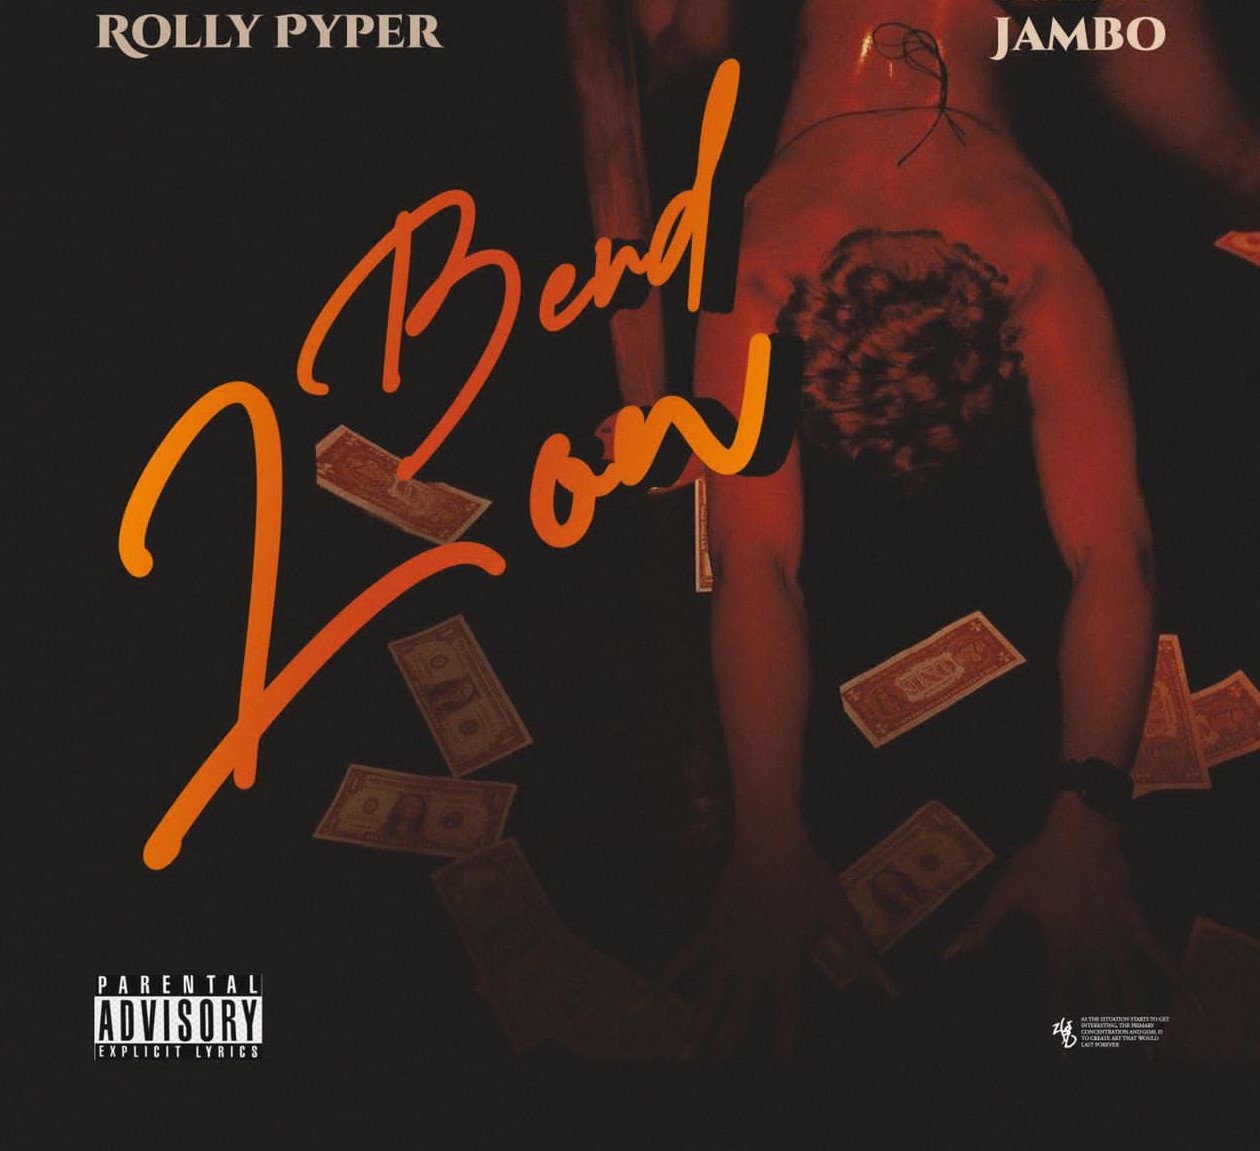 Rolly Pyper – Bend Low Ft. Jambo
